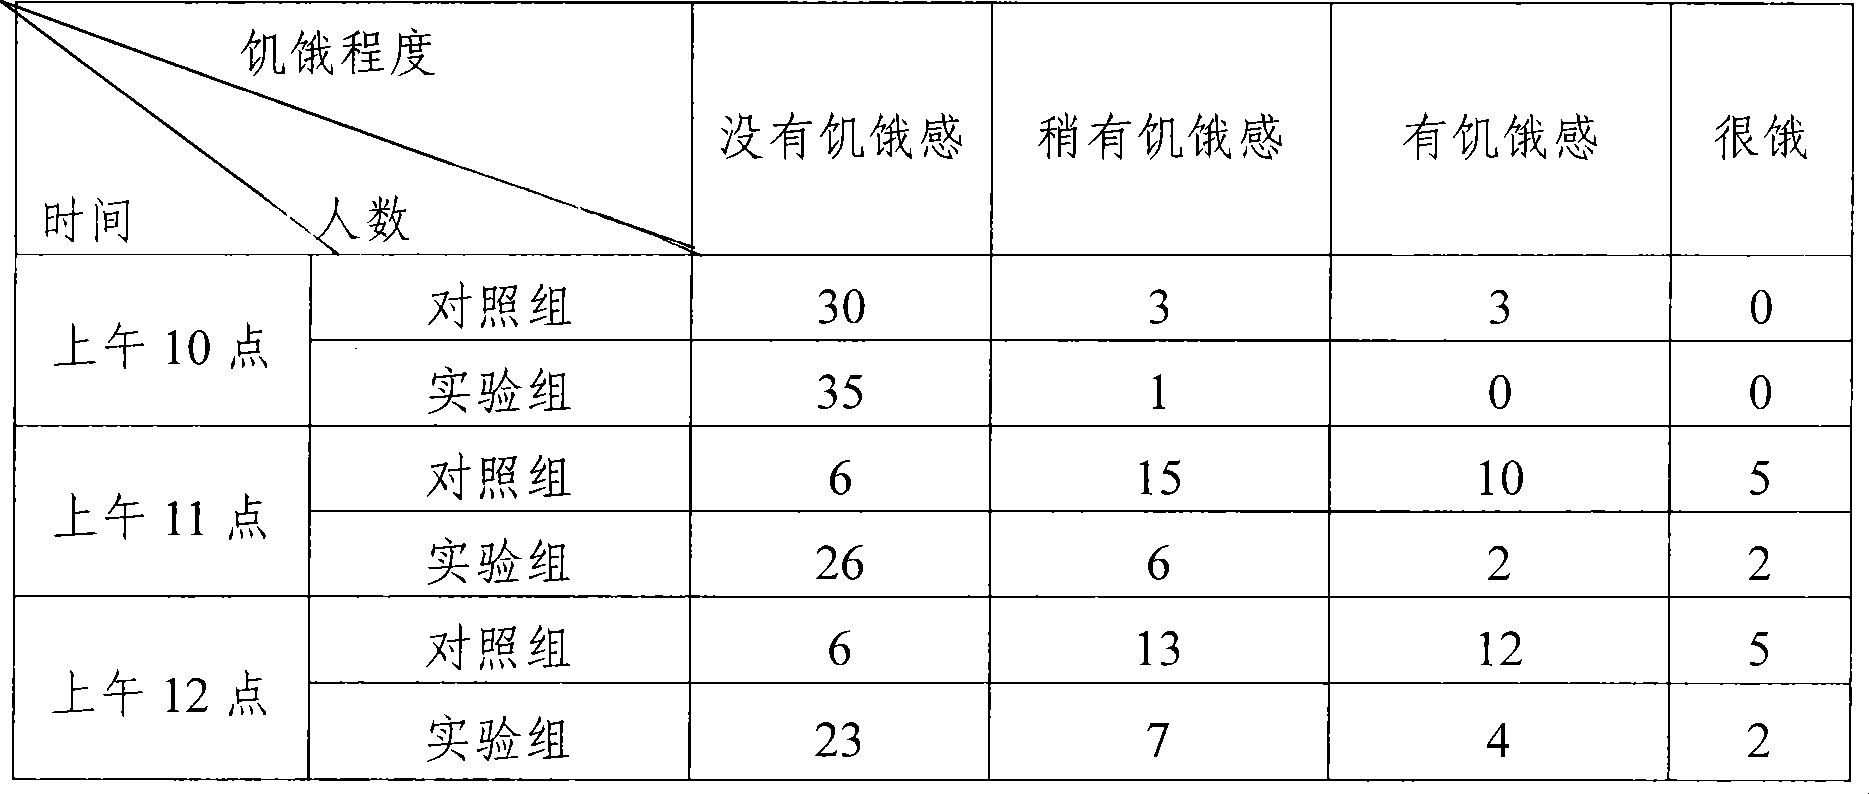 Dietary fiber stick and method for processing the same